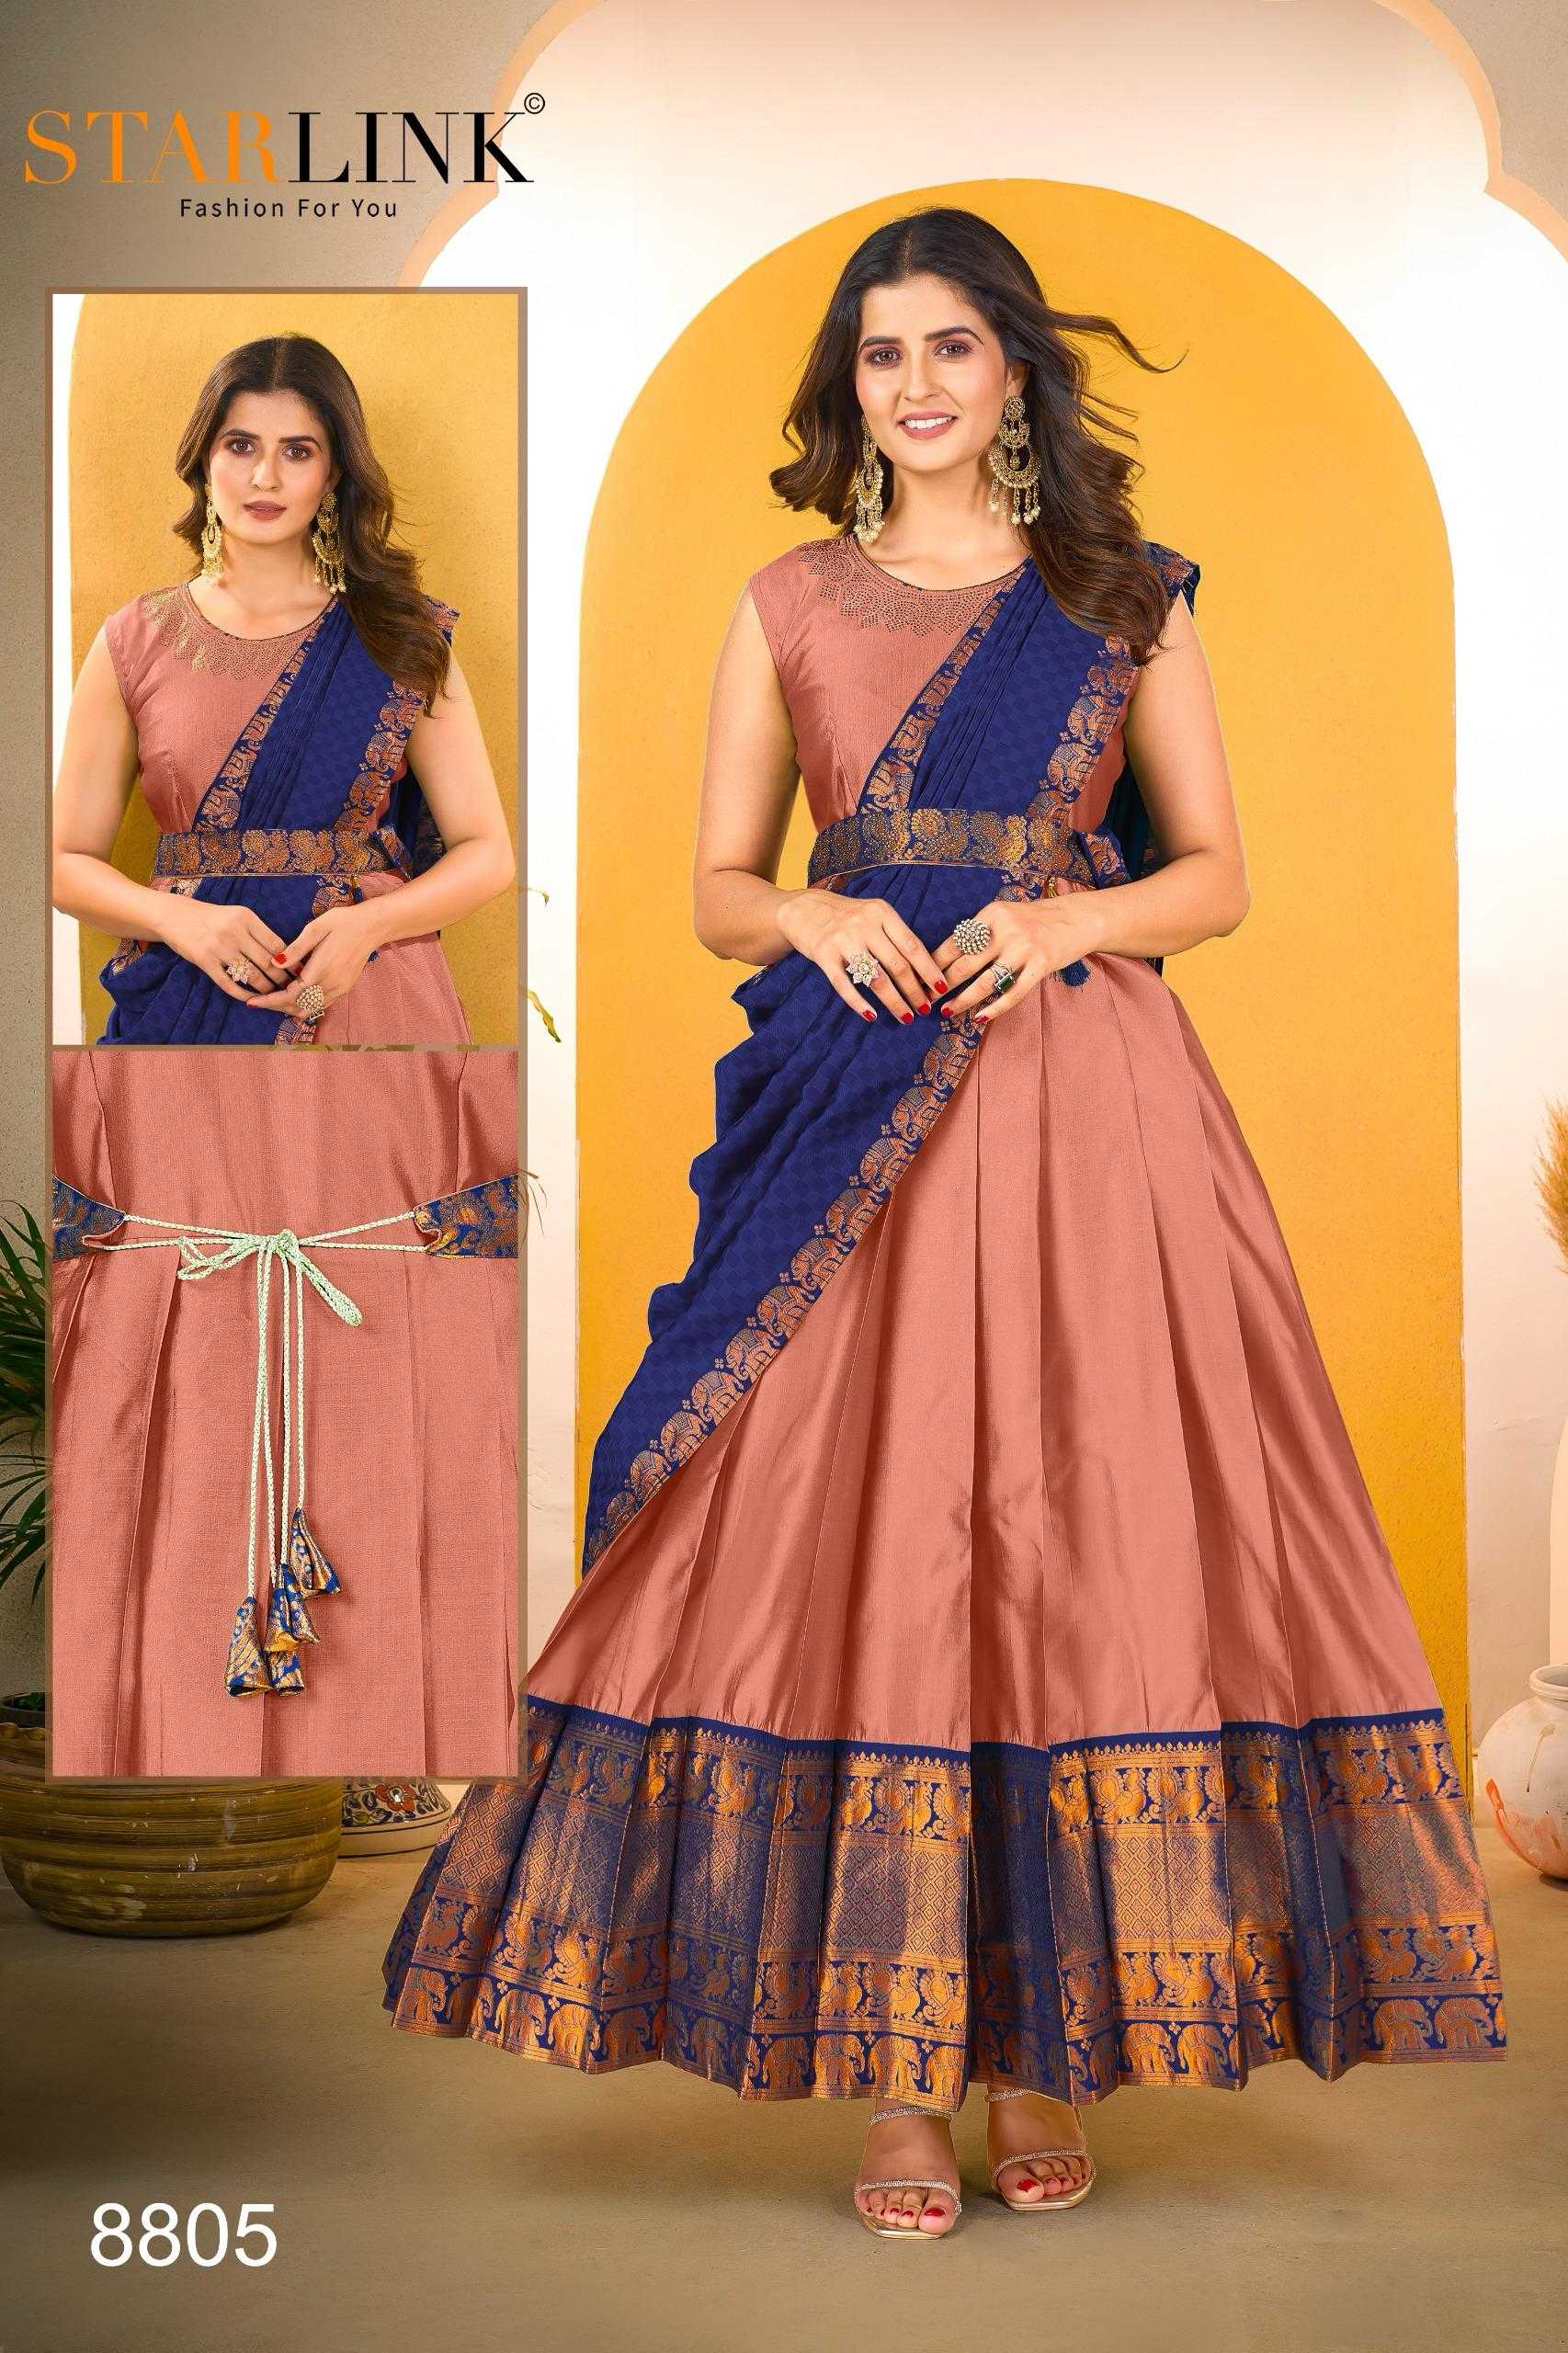 starlink presents dulhan full stitch stylish weaving gown with dupatta combo set